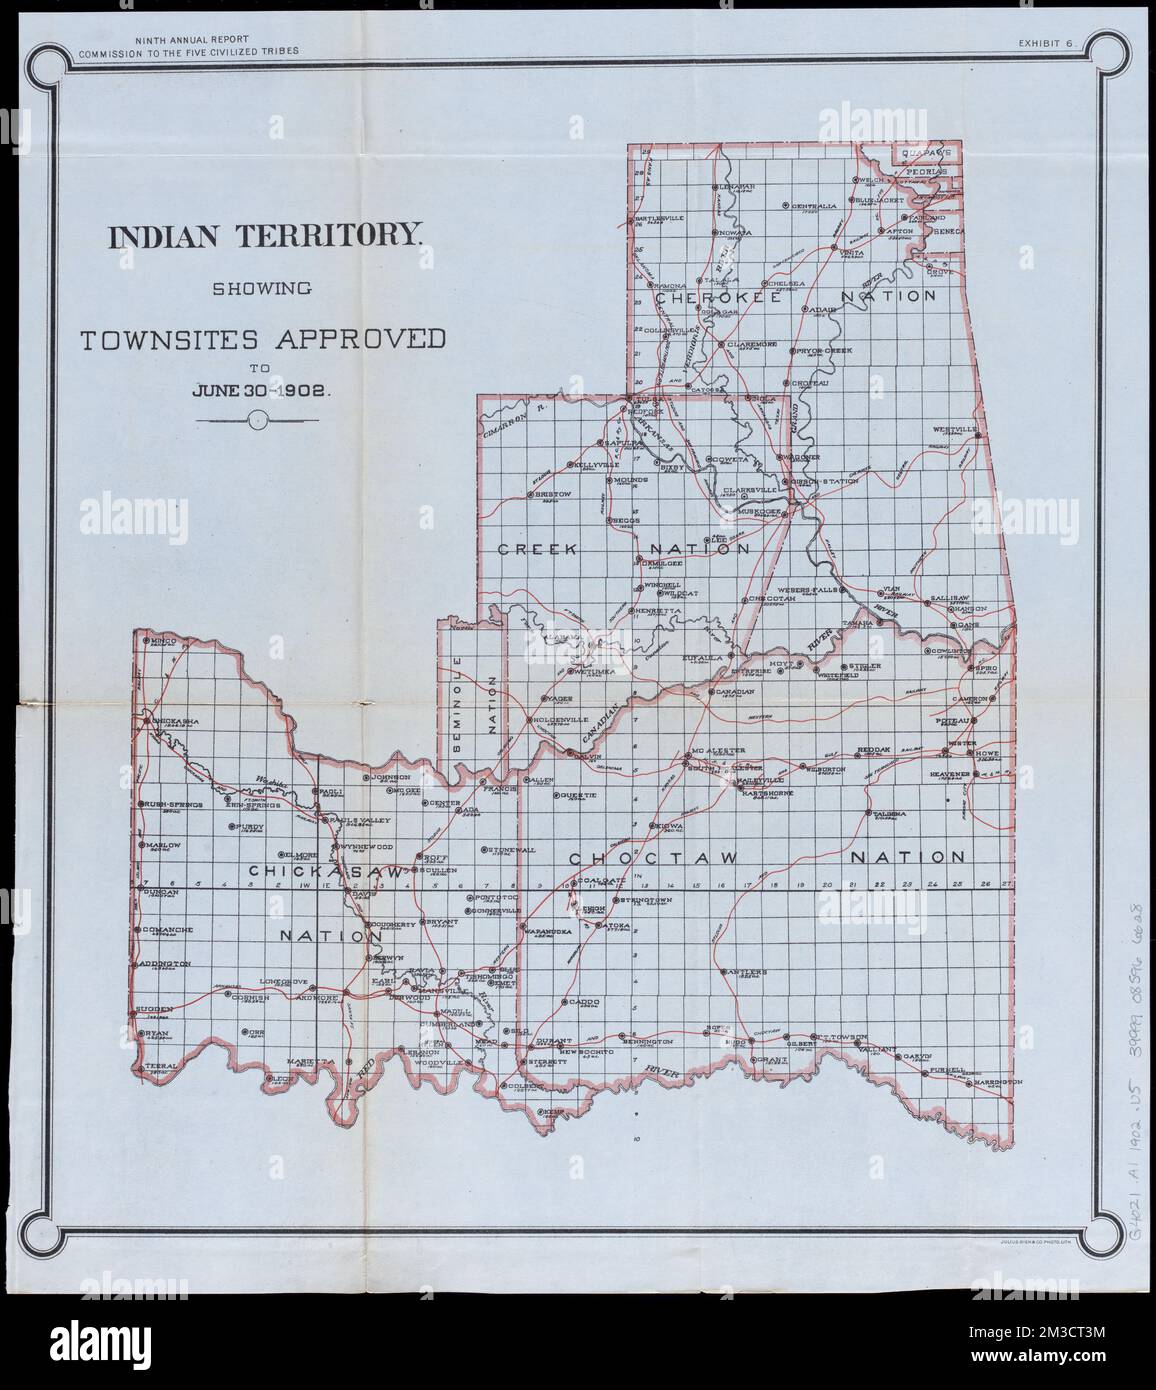 Indian Territory showing townsites approved to June 30-1902 , Indian Territory, Maps, Oklahoma, Maps, Cities and towns, Indian Territory, Maps, City planning, Indian Territory, Maps, Indian reservations, Oklahoma, Maps Norman B. Leventhal Map Center Collection Stock Photo